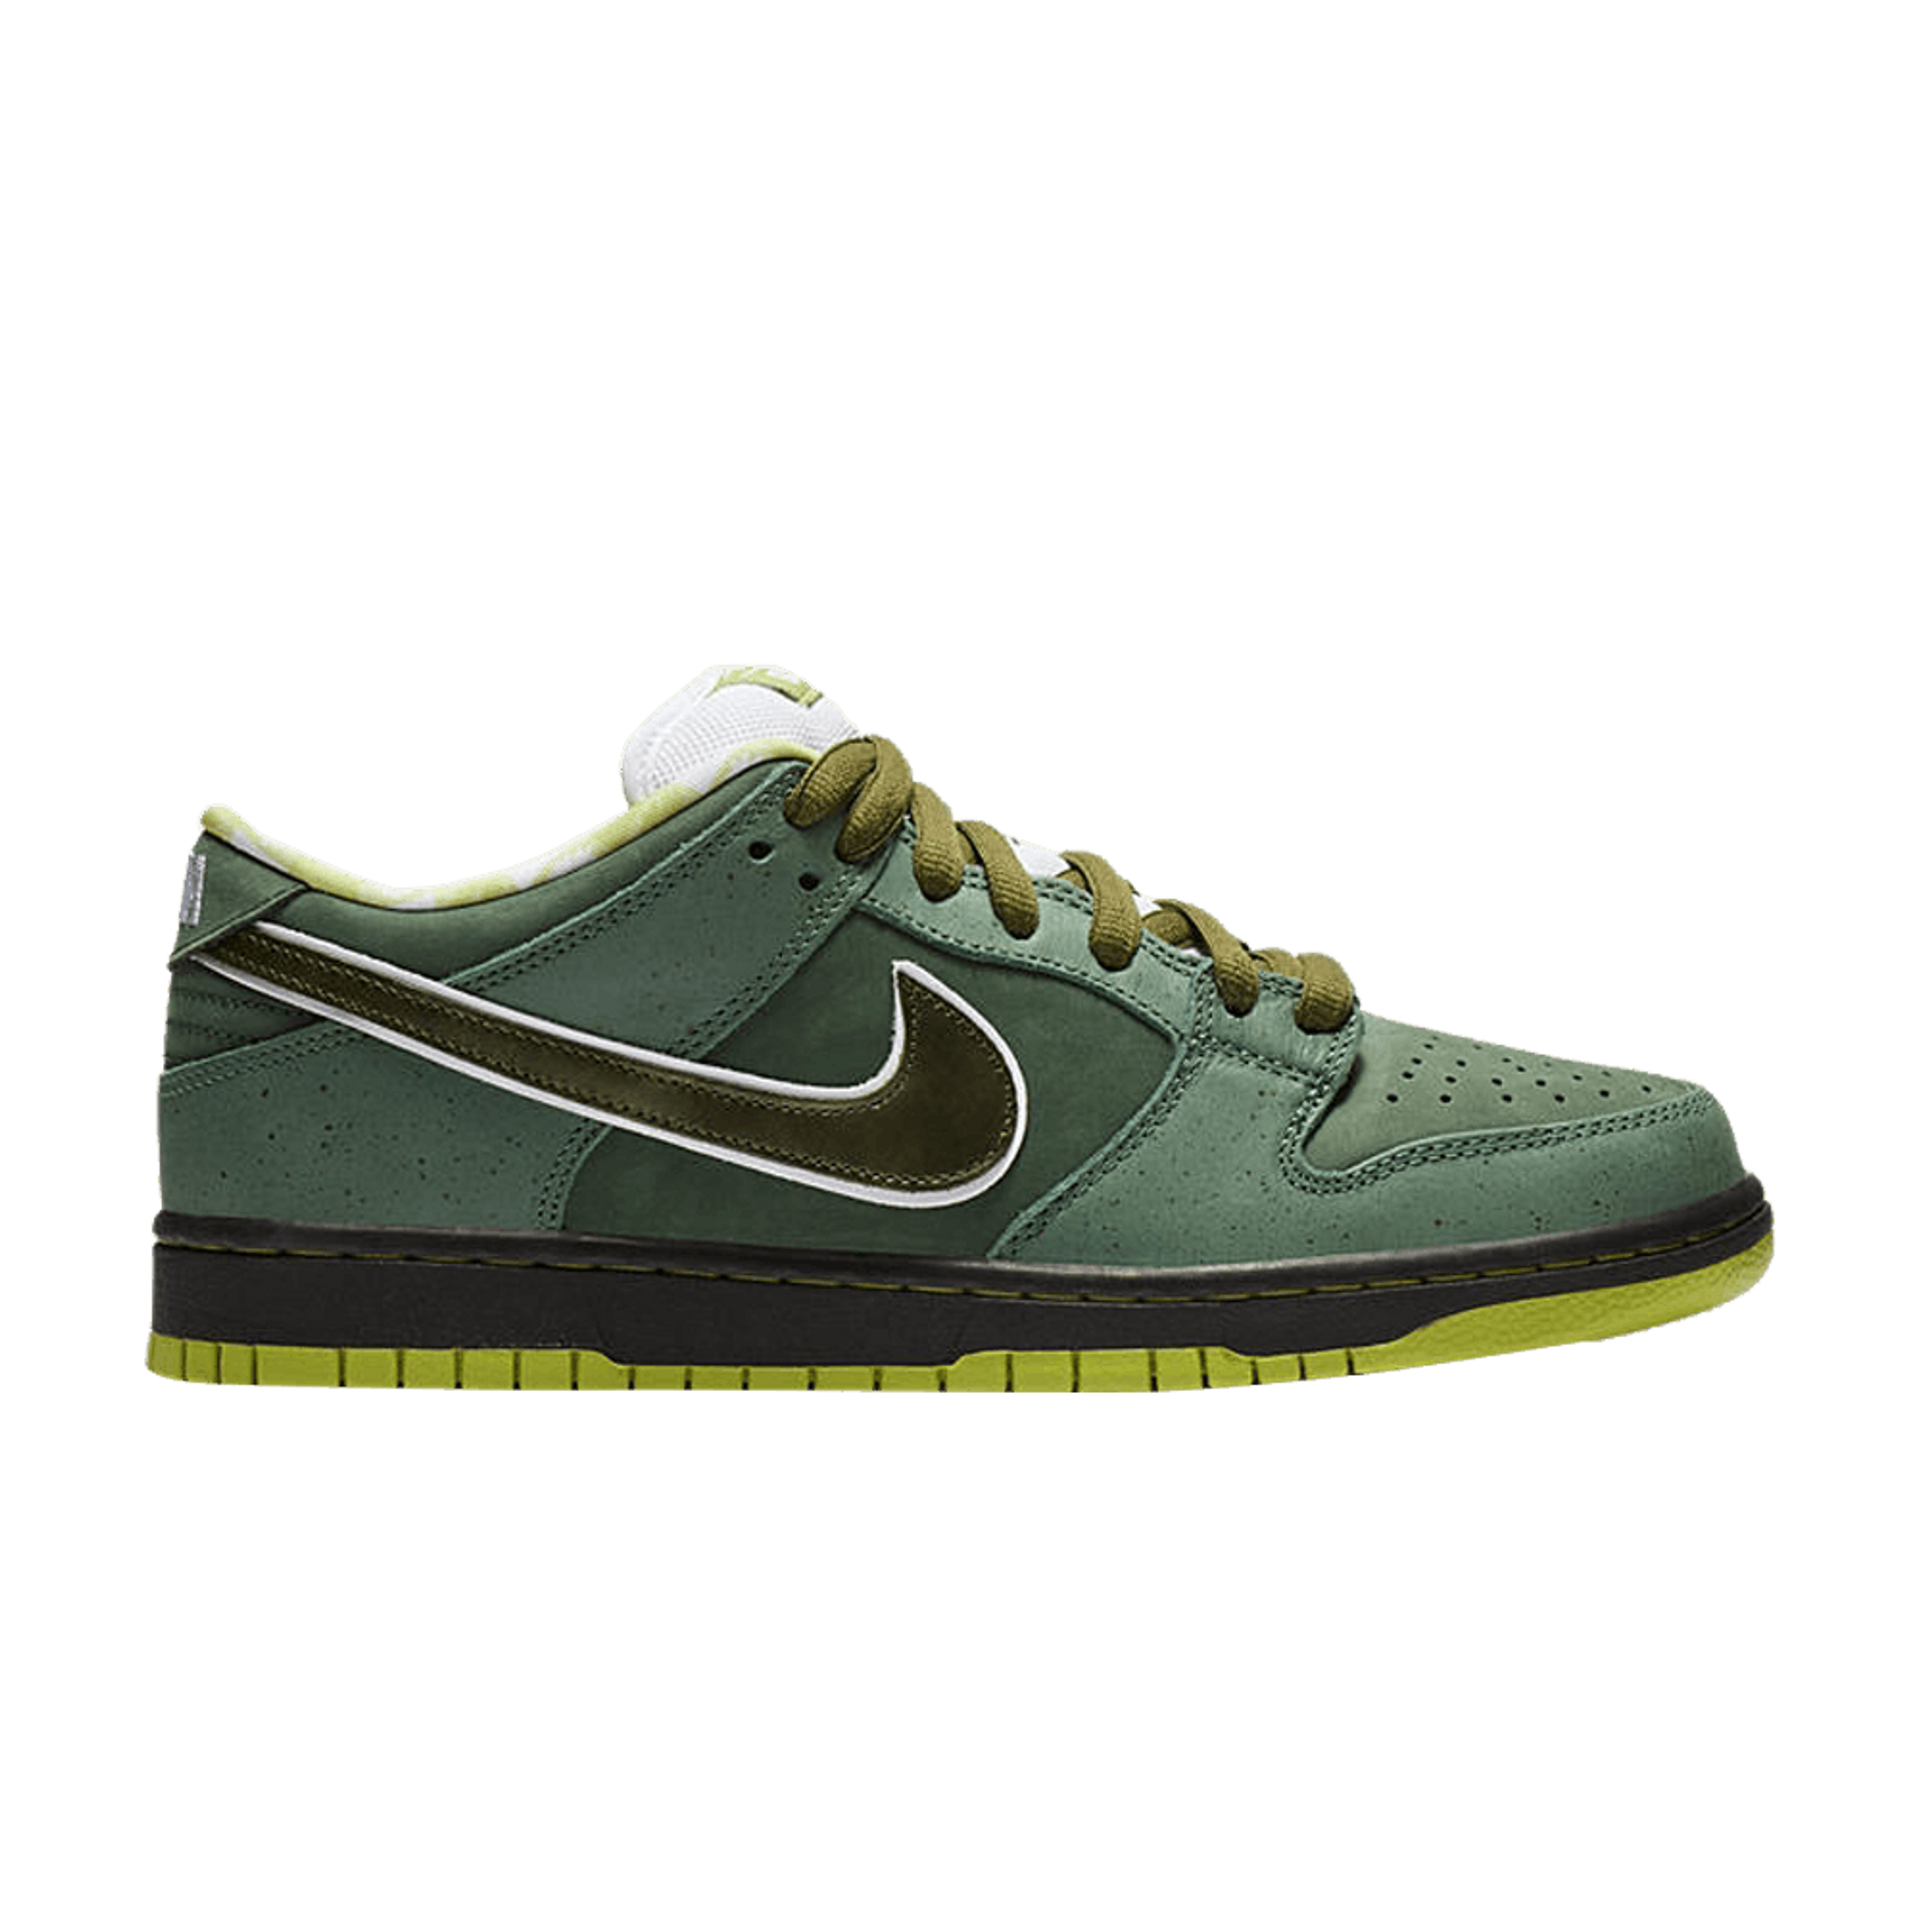 Nike Concepts x Dunk Low SB 'Green Lobster'